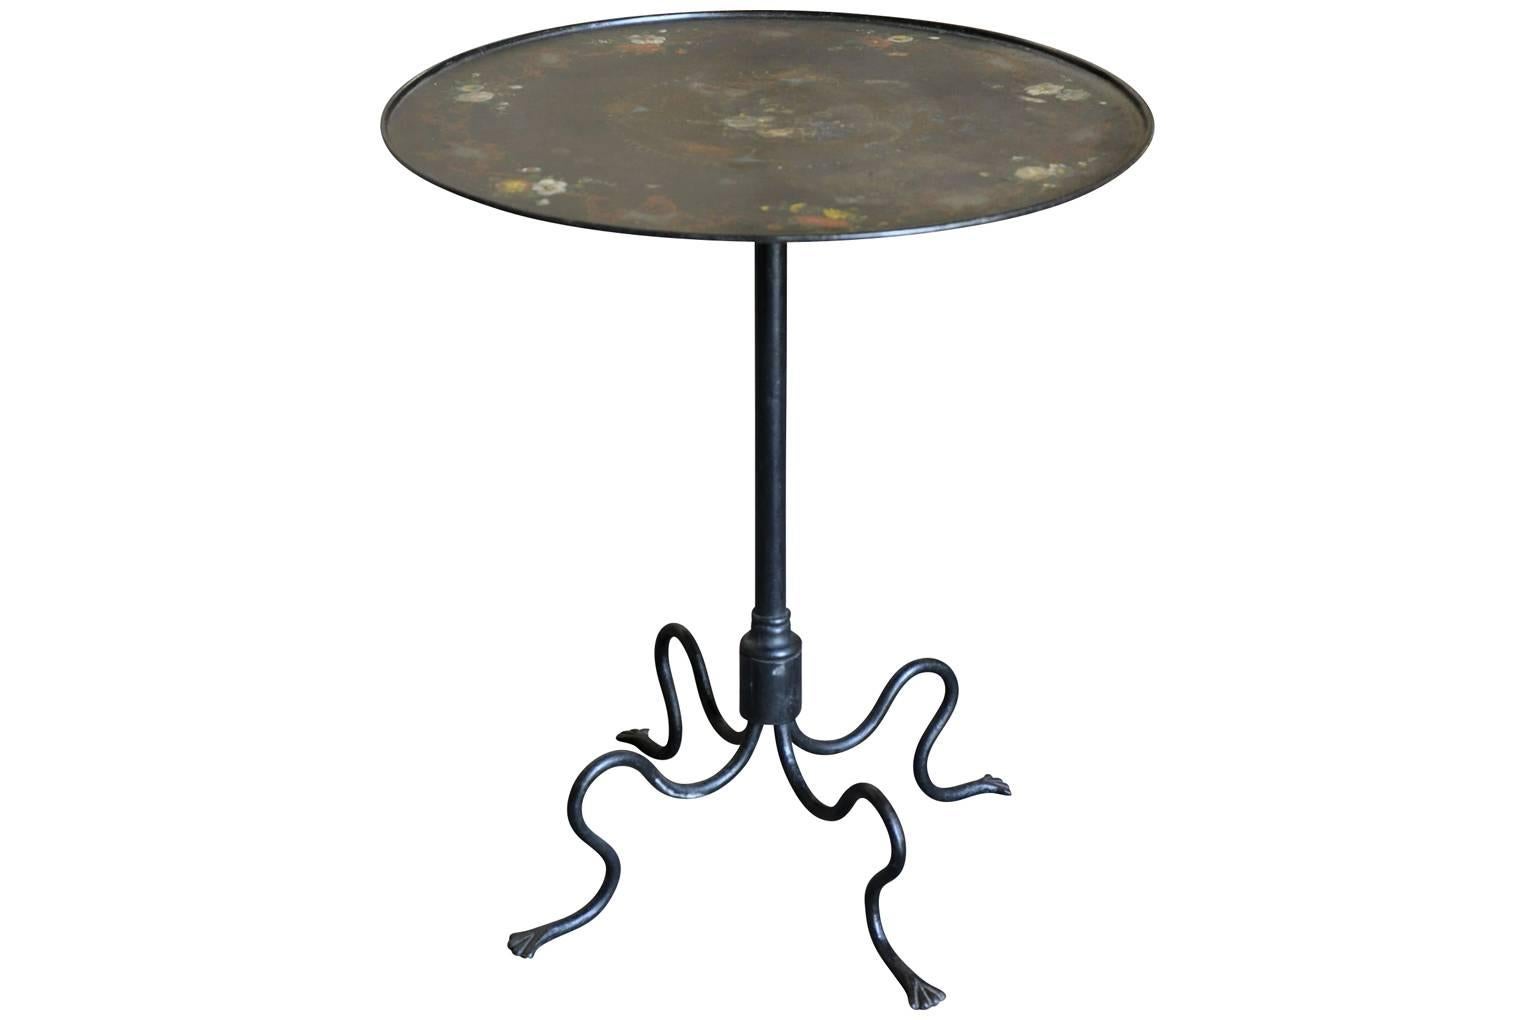 An outstanding and exceptional French Napoleon III tilt-top gueridon. Masterly crafted from painted iron with stunning painted details. The base is so unique and wonderful. A perfect accent piece to any living area.